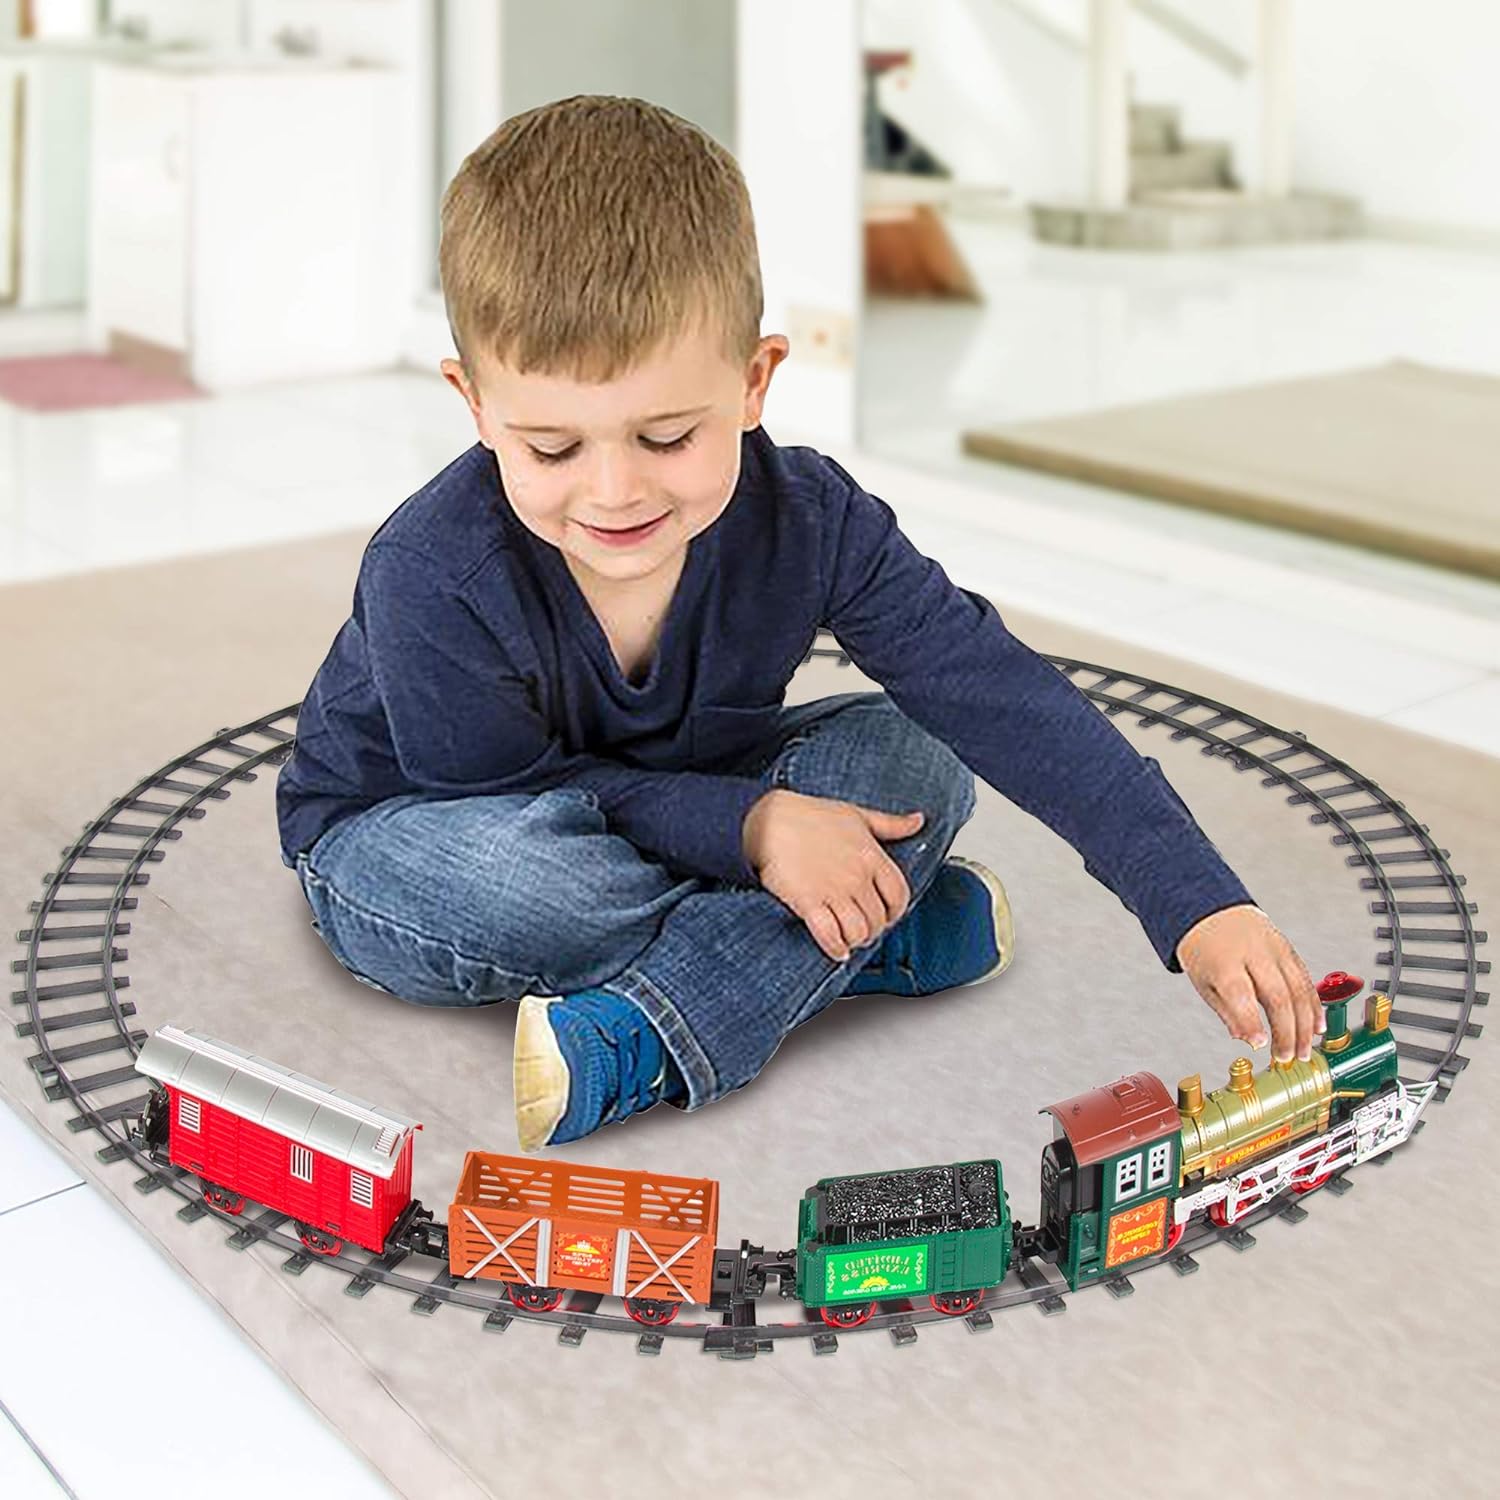 ArtCreativity Electric Train Set for Kids - Battery-Operated Toy with 4 Cars and Tracks - Durable Plastic - Cute Christmas Holiday Train for Under The Tree, Great Gift Idea for Boys, Girls, Toddlers